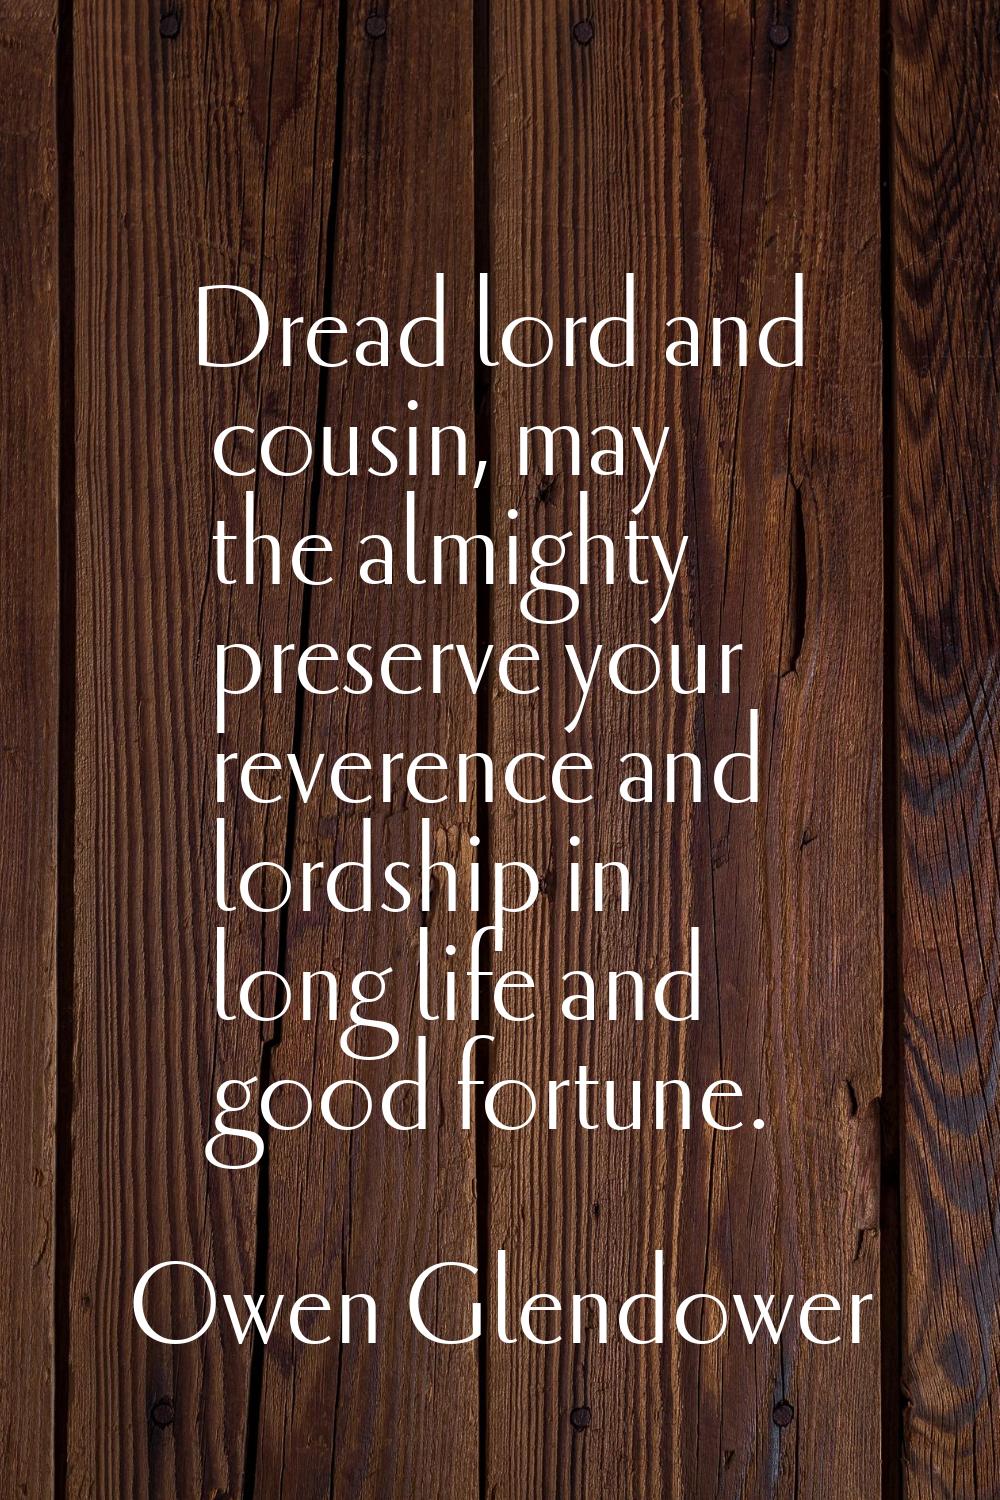 Dread lord and cousin, may the almighty preserve your reverence and lordship in long life and good 